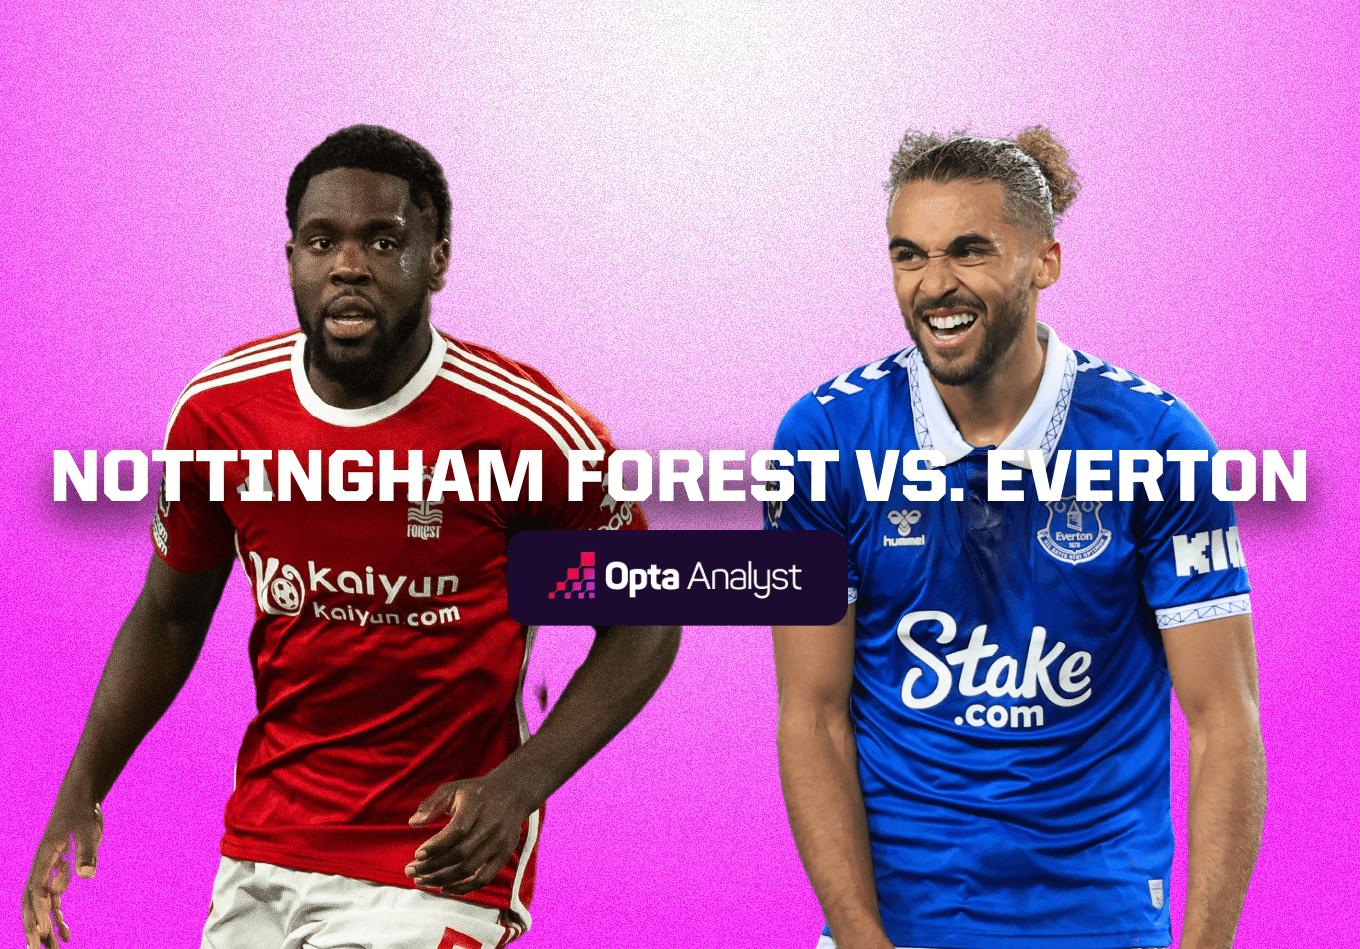 Nottingham Forest vs Everton: Prediction and Preview